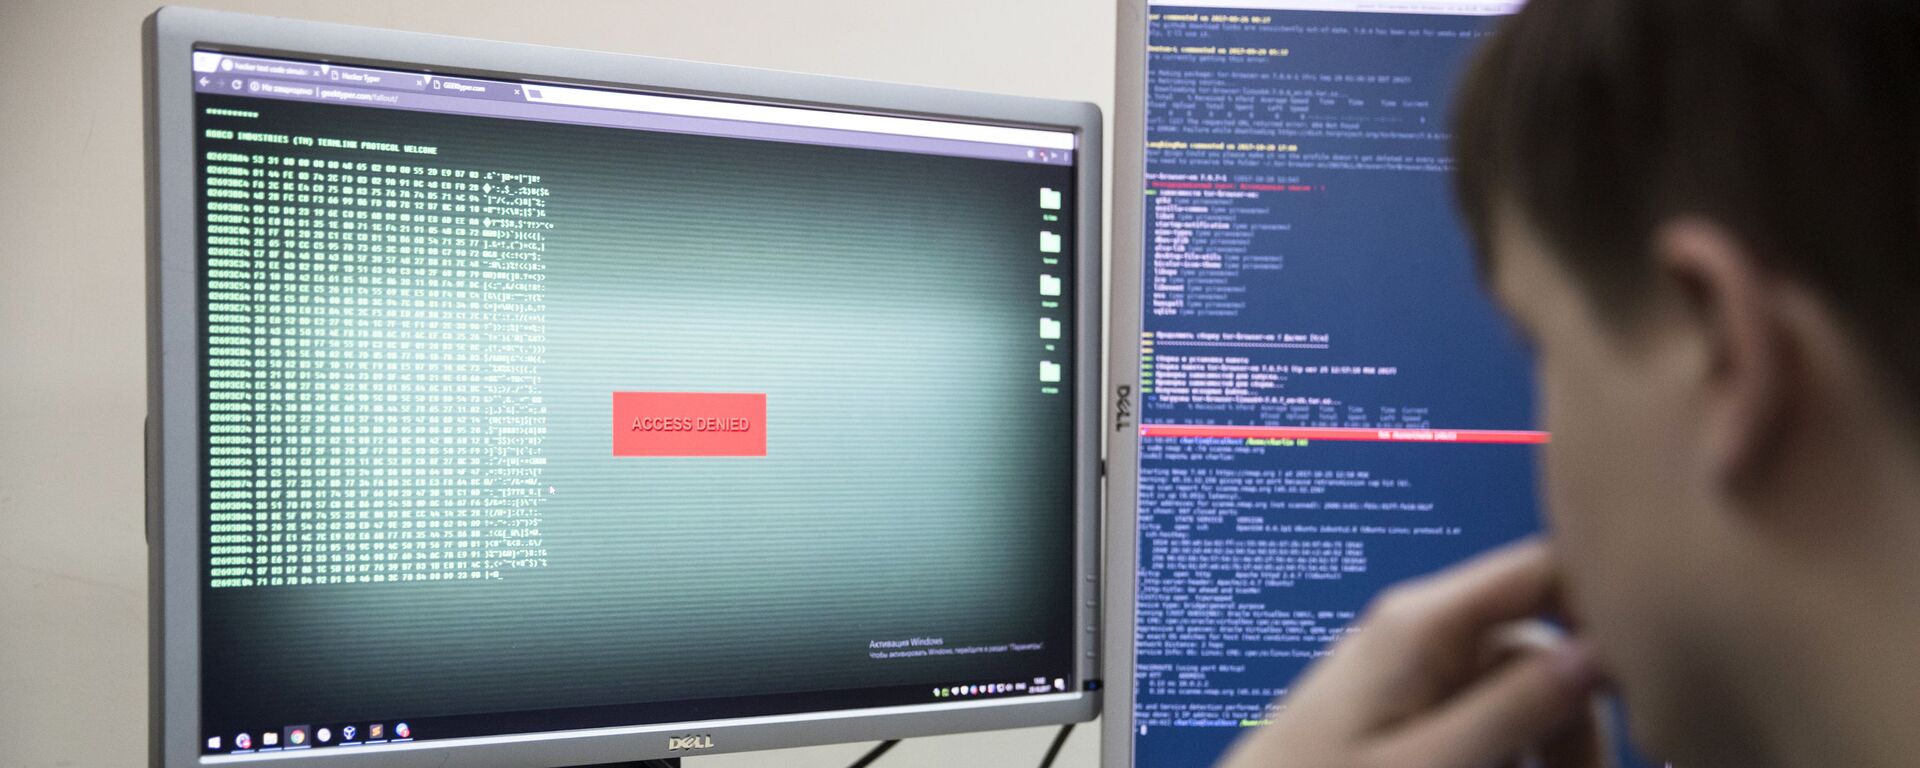 An employee of Global Cyber Security Company Group-IB develops a computer code in an office in Moscow, Russia, Wednesday, Oct. 25, 2017. A new strain of malicious software has paralyzed computers at a Ukrainian airport, the Ukrainian capital's subway and at some independent Russian media. Moscow-based Global Cyber Security Company Group-IB said in a statement Wednesday the ransomware called BadRabbit also tried to penetrate the computers of major Russian banks but failed. None of the banks has reported any attacks.  - Sputnik International, 1920, 02.09.2021